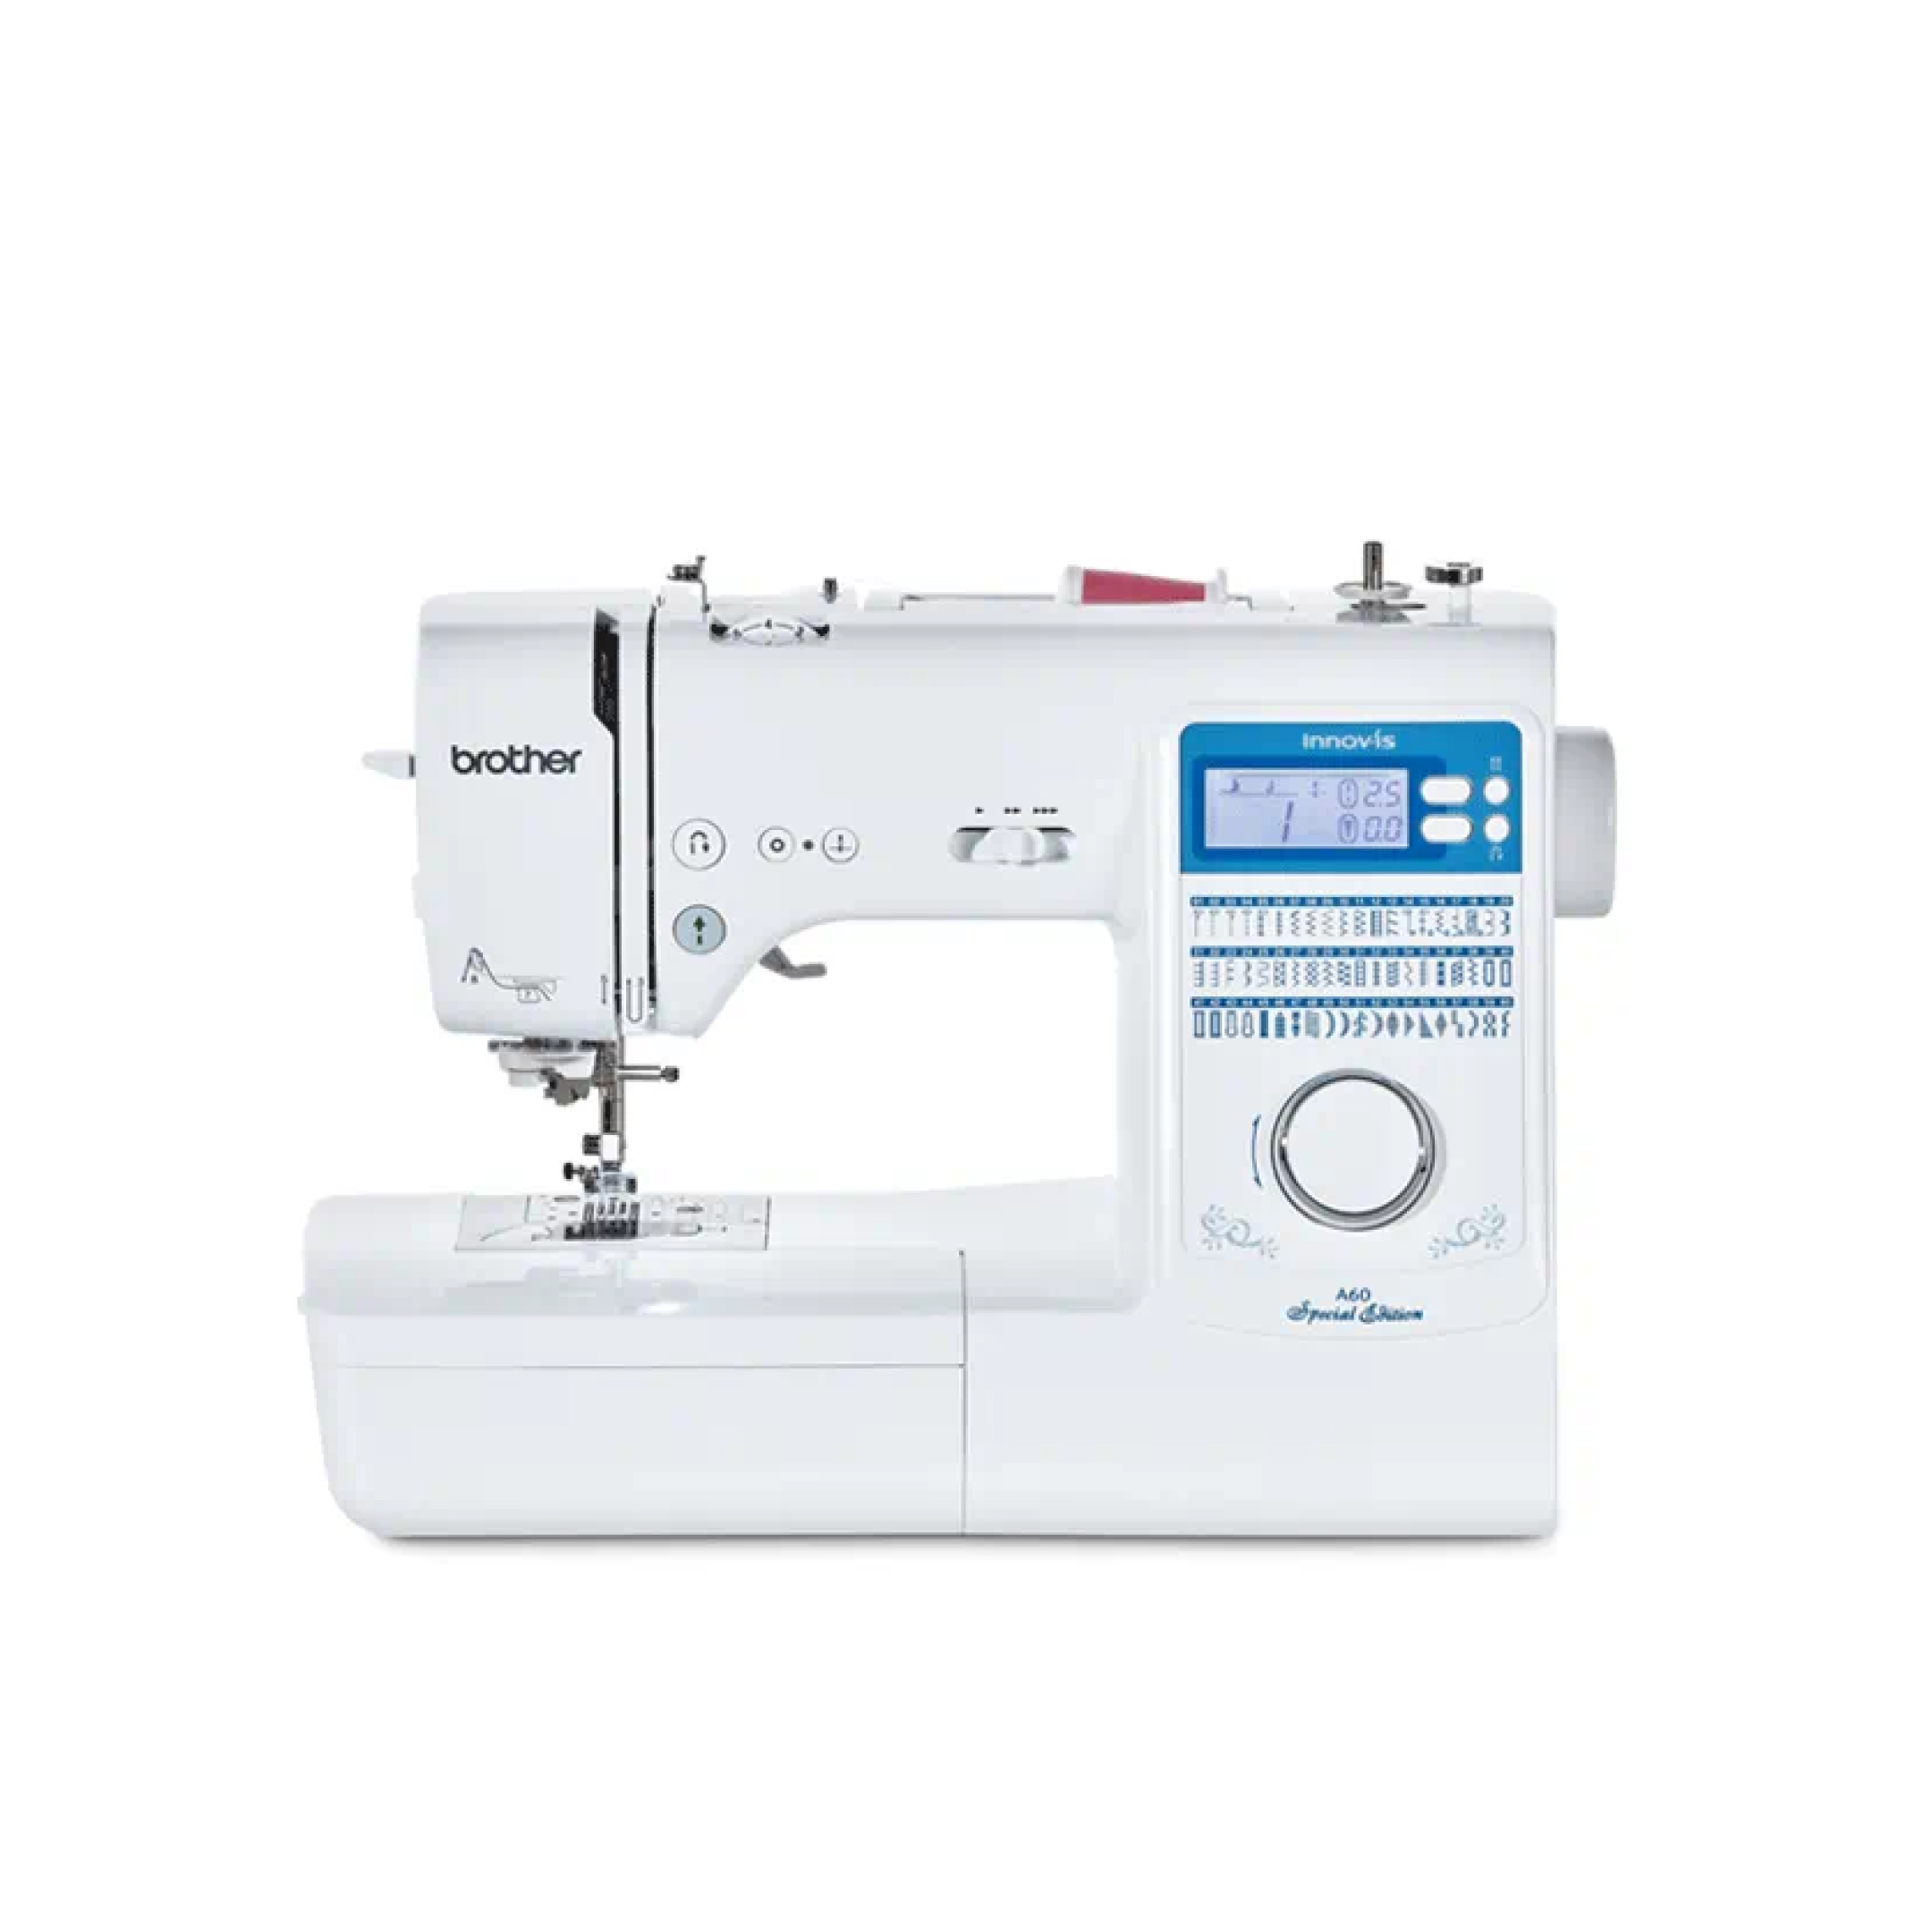 Brother NQ3550W Combo Embroidery Sewing Machine ⋆ Carolina Forest Vac & Sew